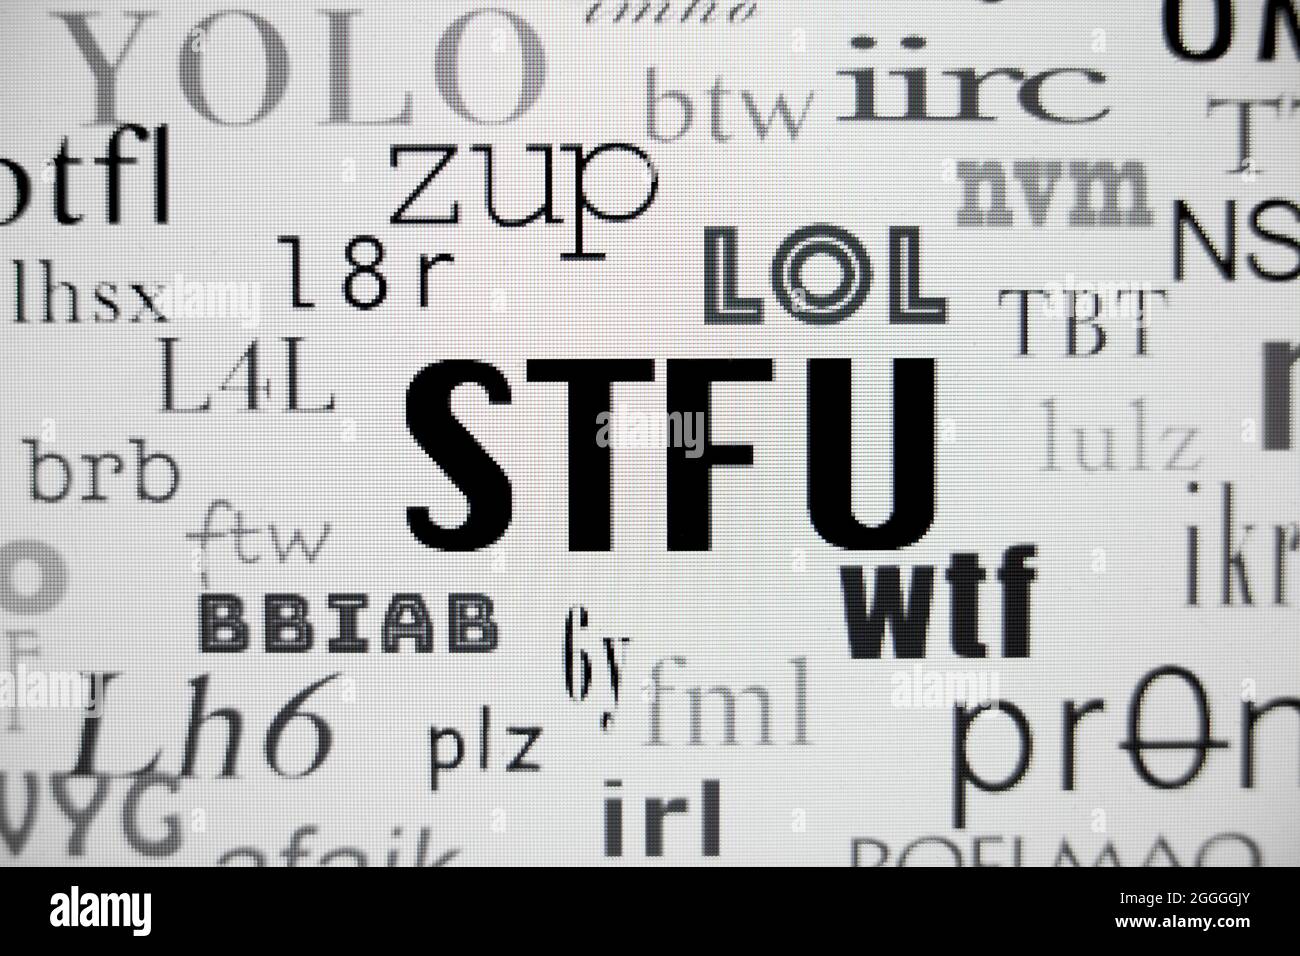 STFU and other commonly used internet acronyms on screen (internet slang, text slang, text acronym) - USA Stock Photo